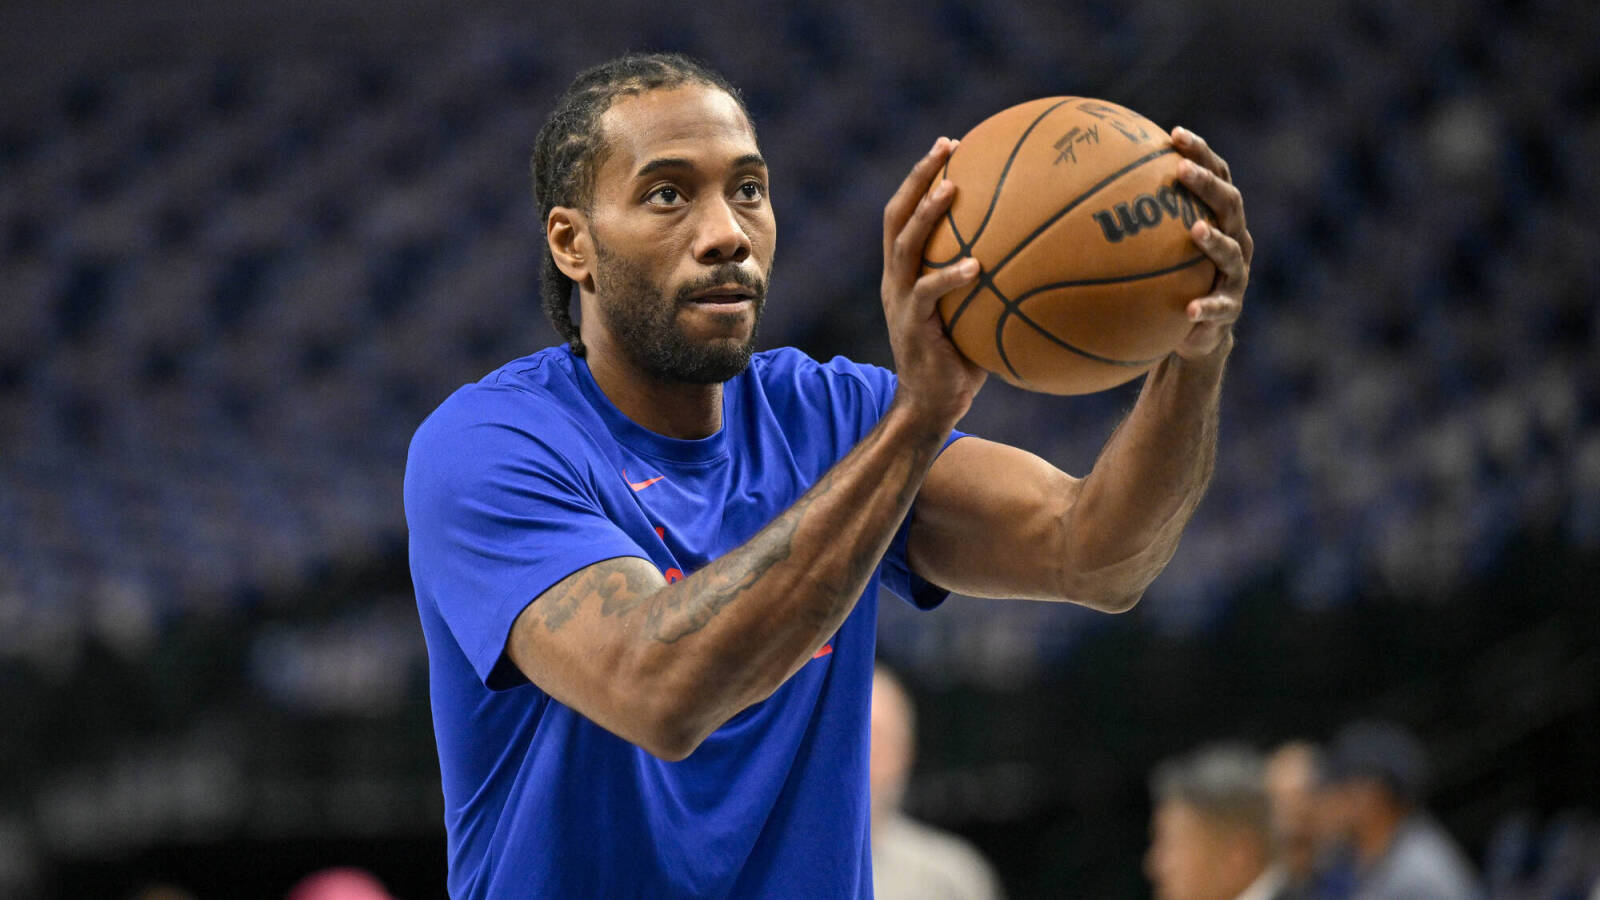 Clippers' postseason is on the brink due to Kawhi Leonard's persistent knee issues